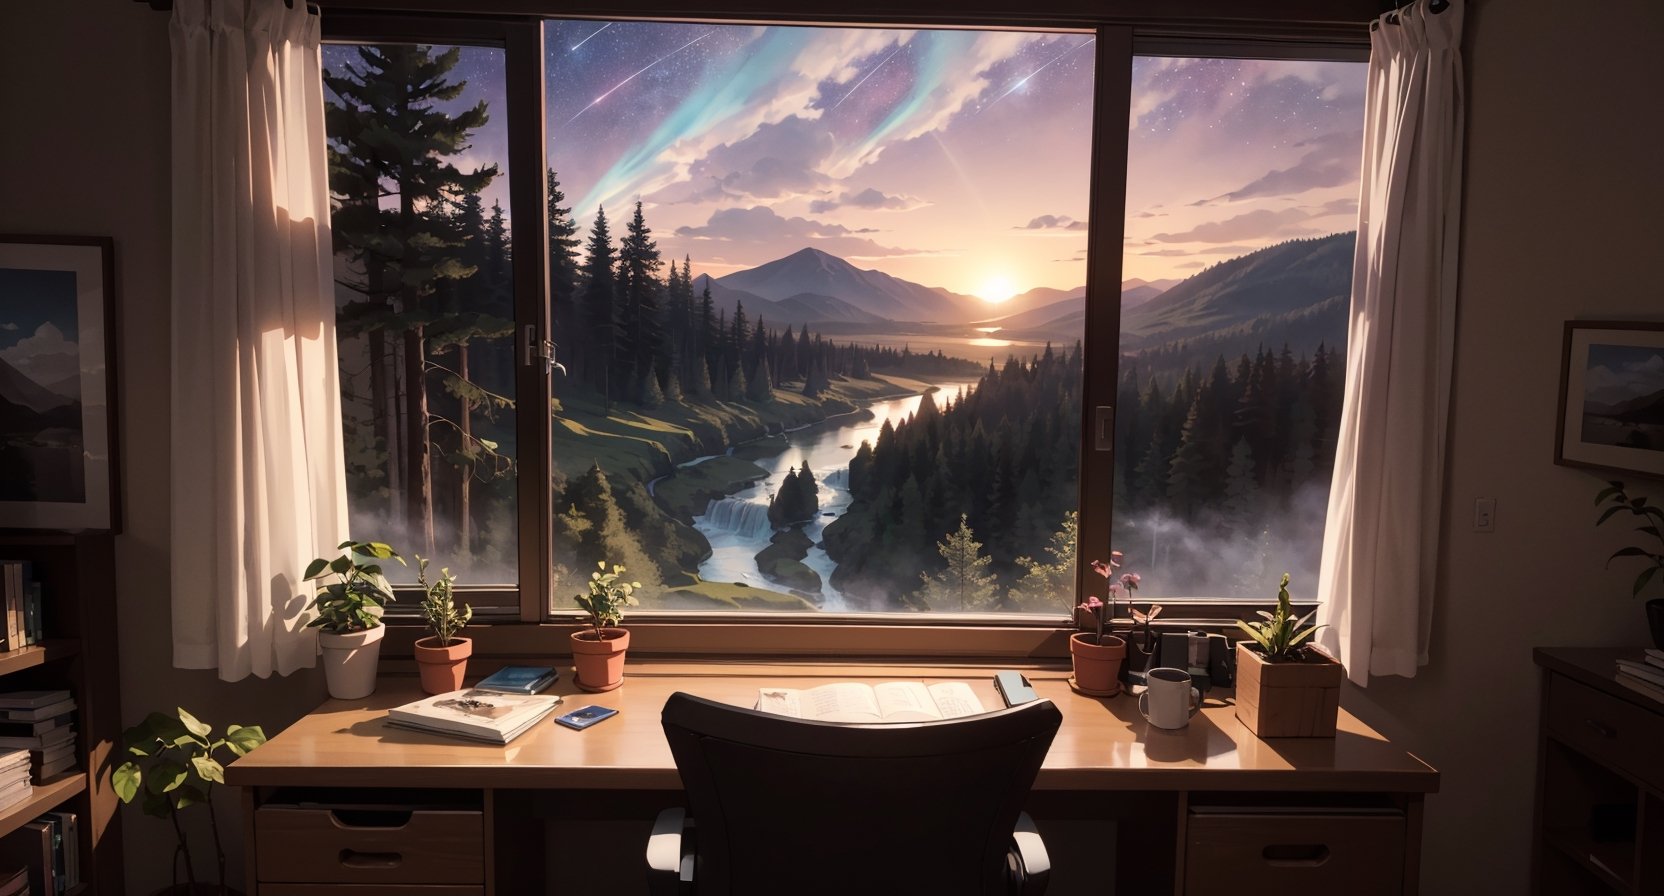 (view from inside office),As the sun sets, the sky above the valley turns into a canvas of twilight hues. The stars begin to twinkle, casting a warm glow over the landscape. The cabin, nestled among the trees, is illuminated by the soft light spilling from its windows. The waterfall continues to flow, its roar muffled by the surrounding forest. The entire scene is bathed in a serene, ethereal glow.